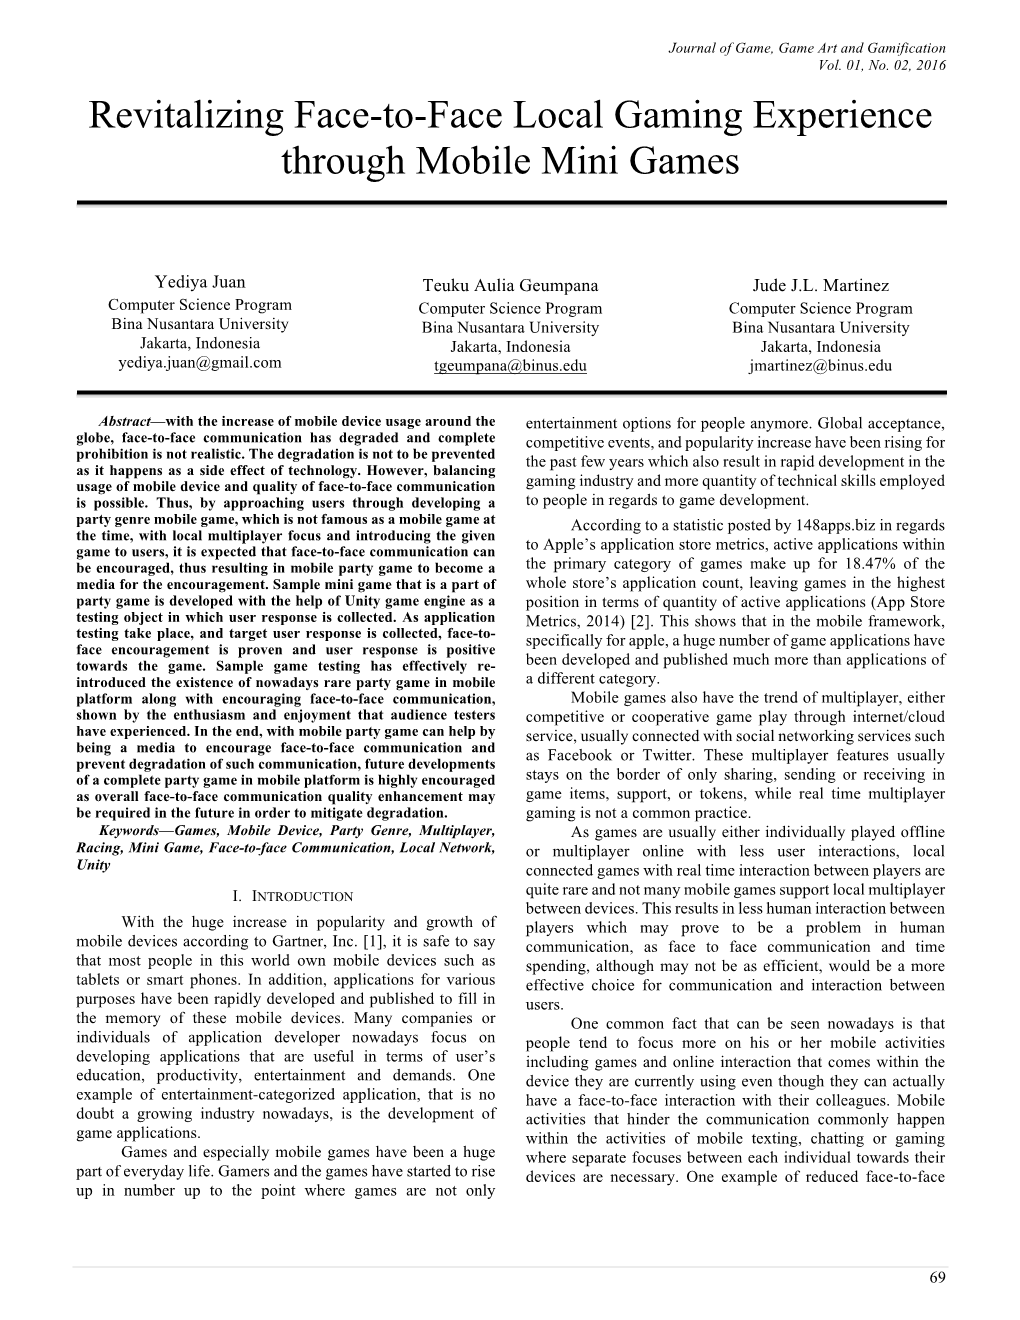 Revitalizing Face-To-Face Local Gaming Experience Through Mobile Mini Games